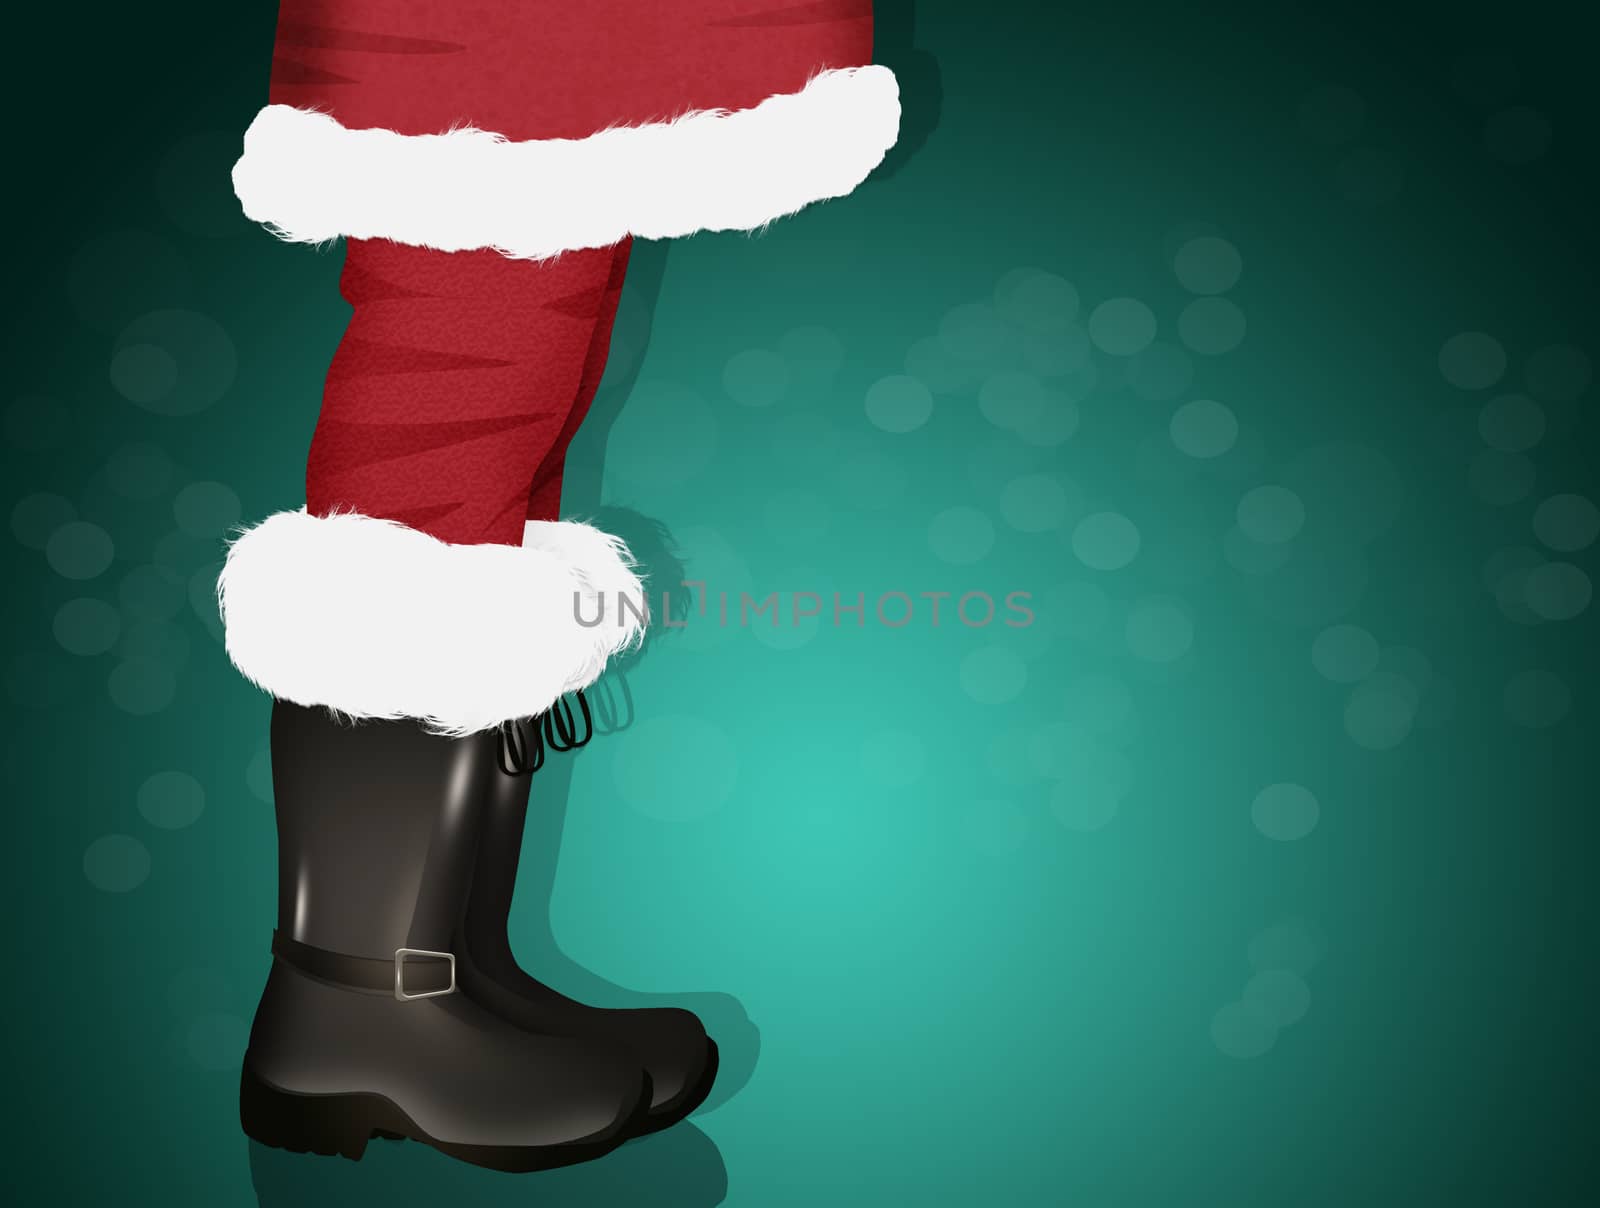 Santa's legs in boots by adrenalina